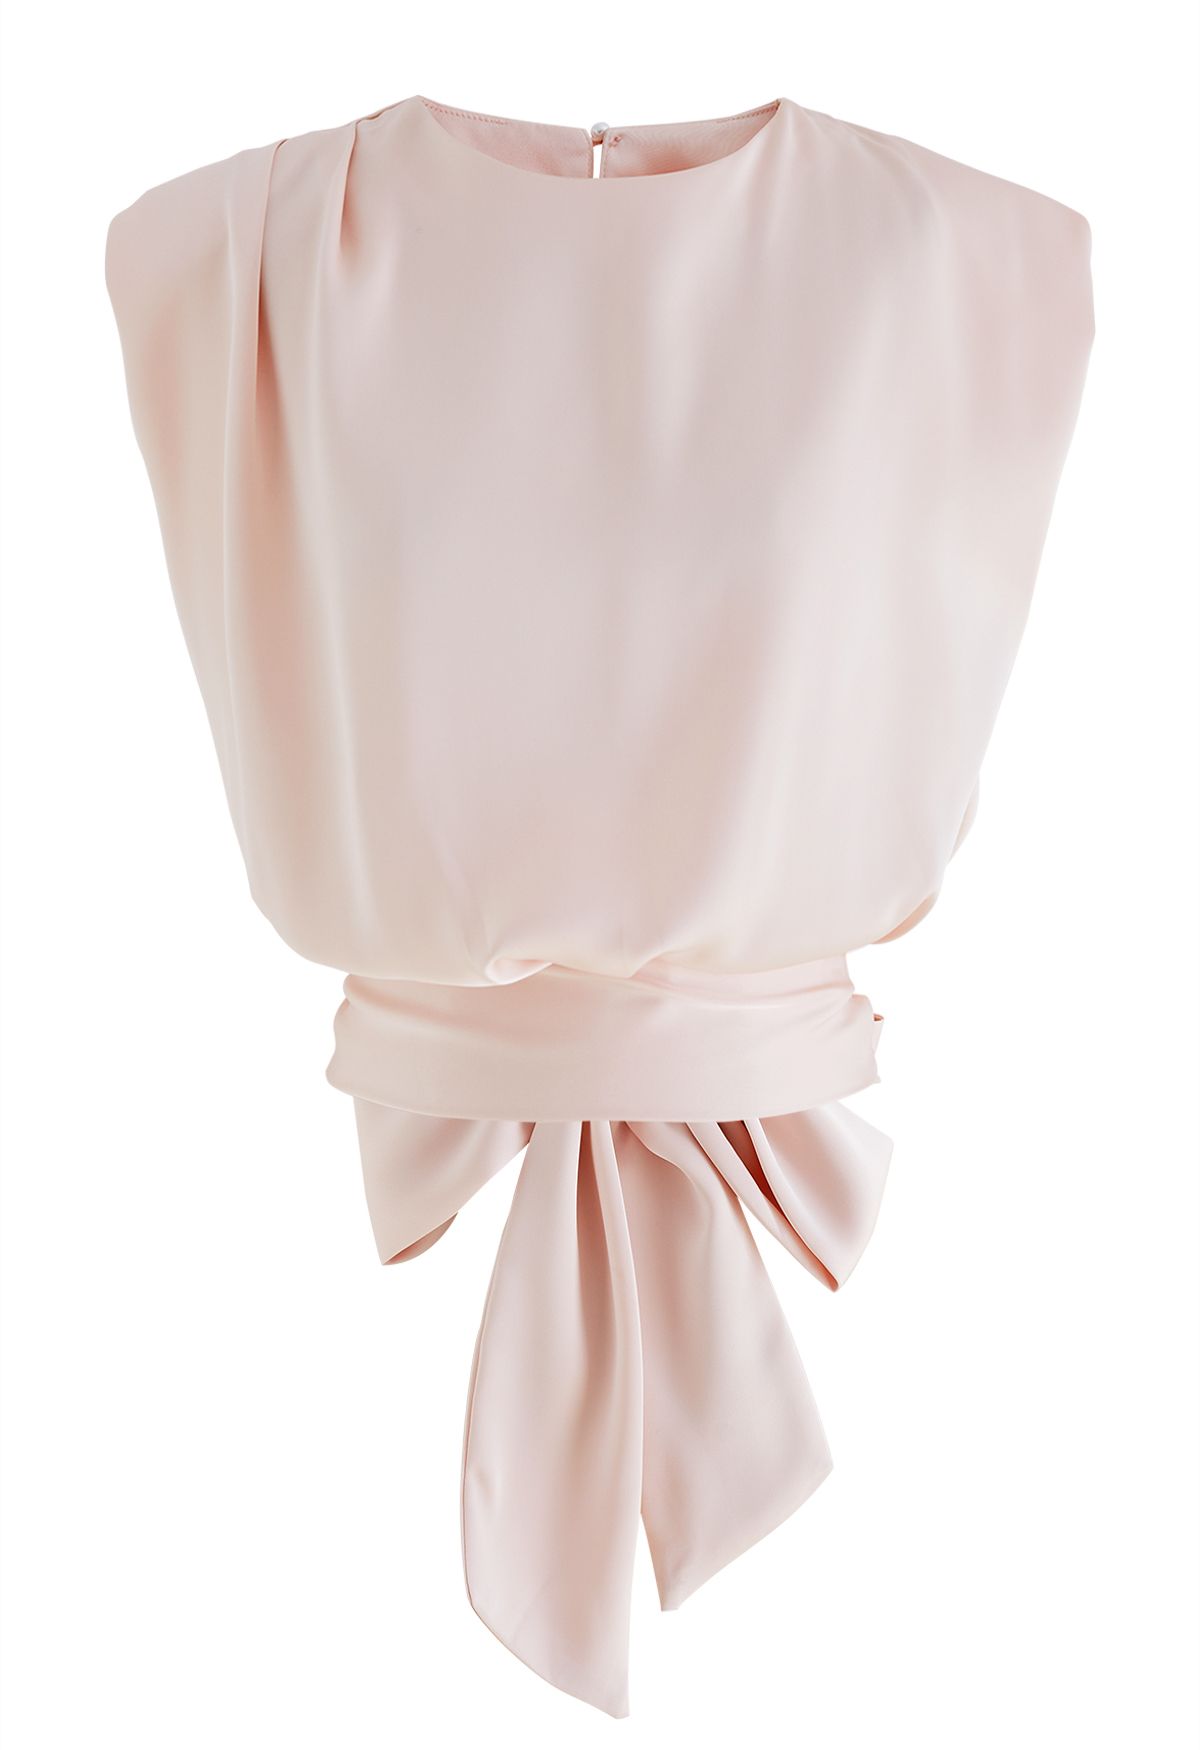 Satin Tie Back Sleeveless Top in Pink - Retro, Indie and Unique Fashion